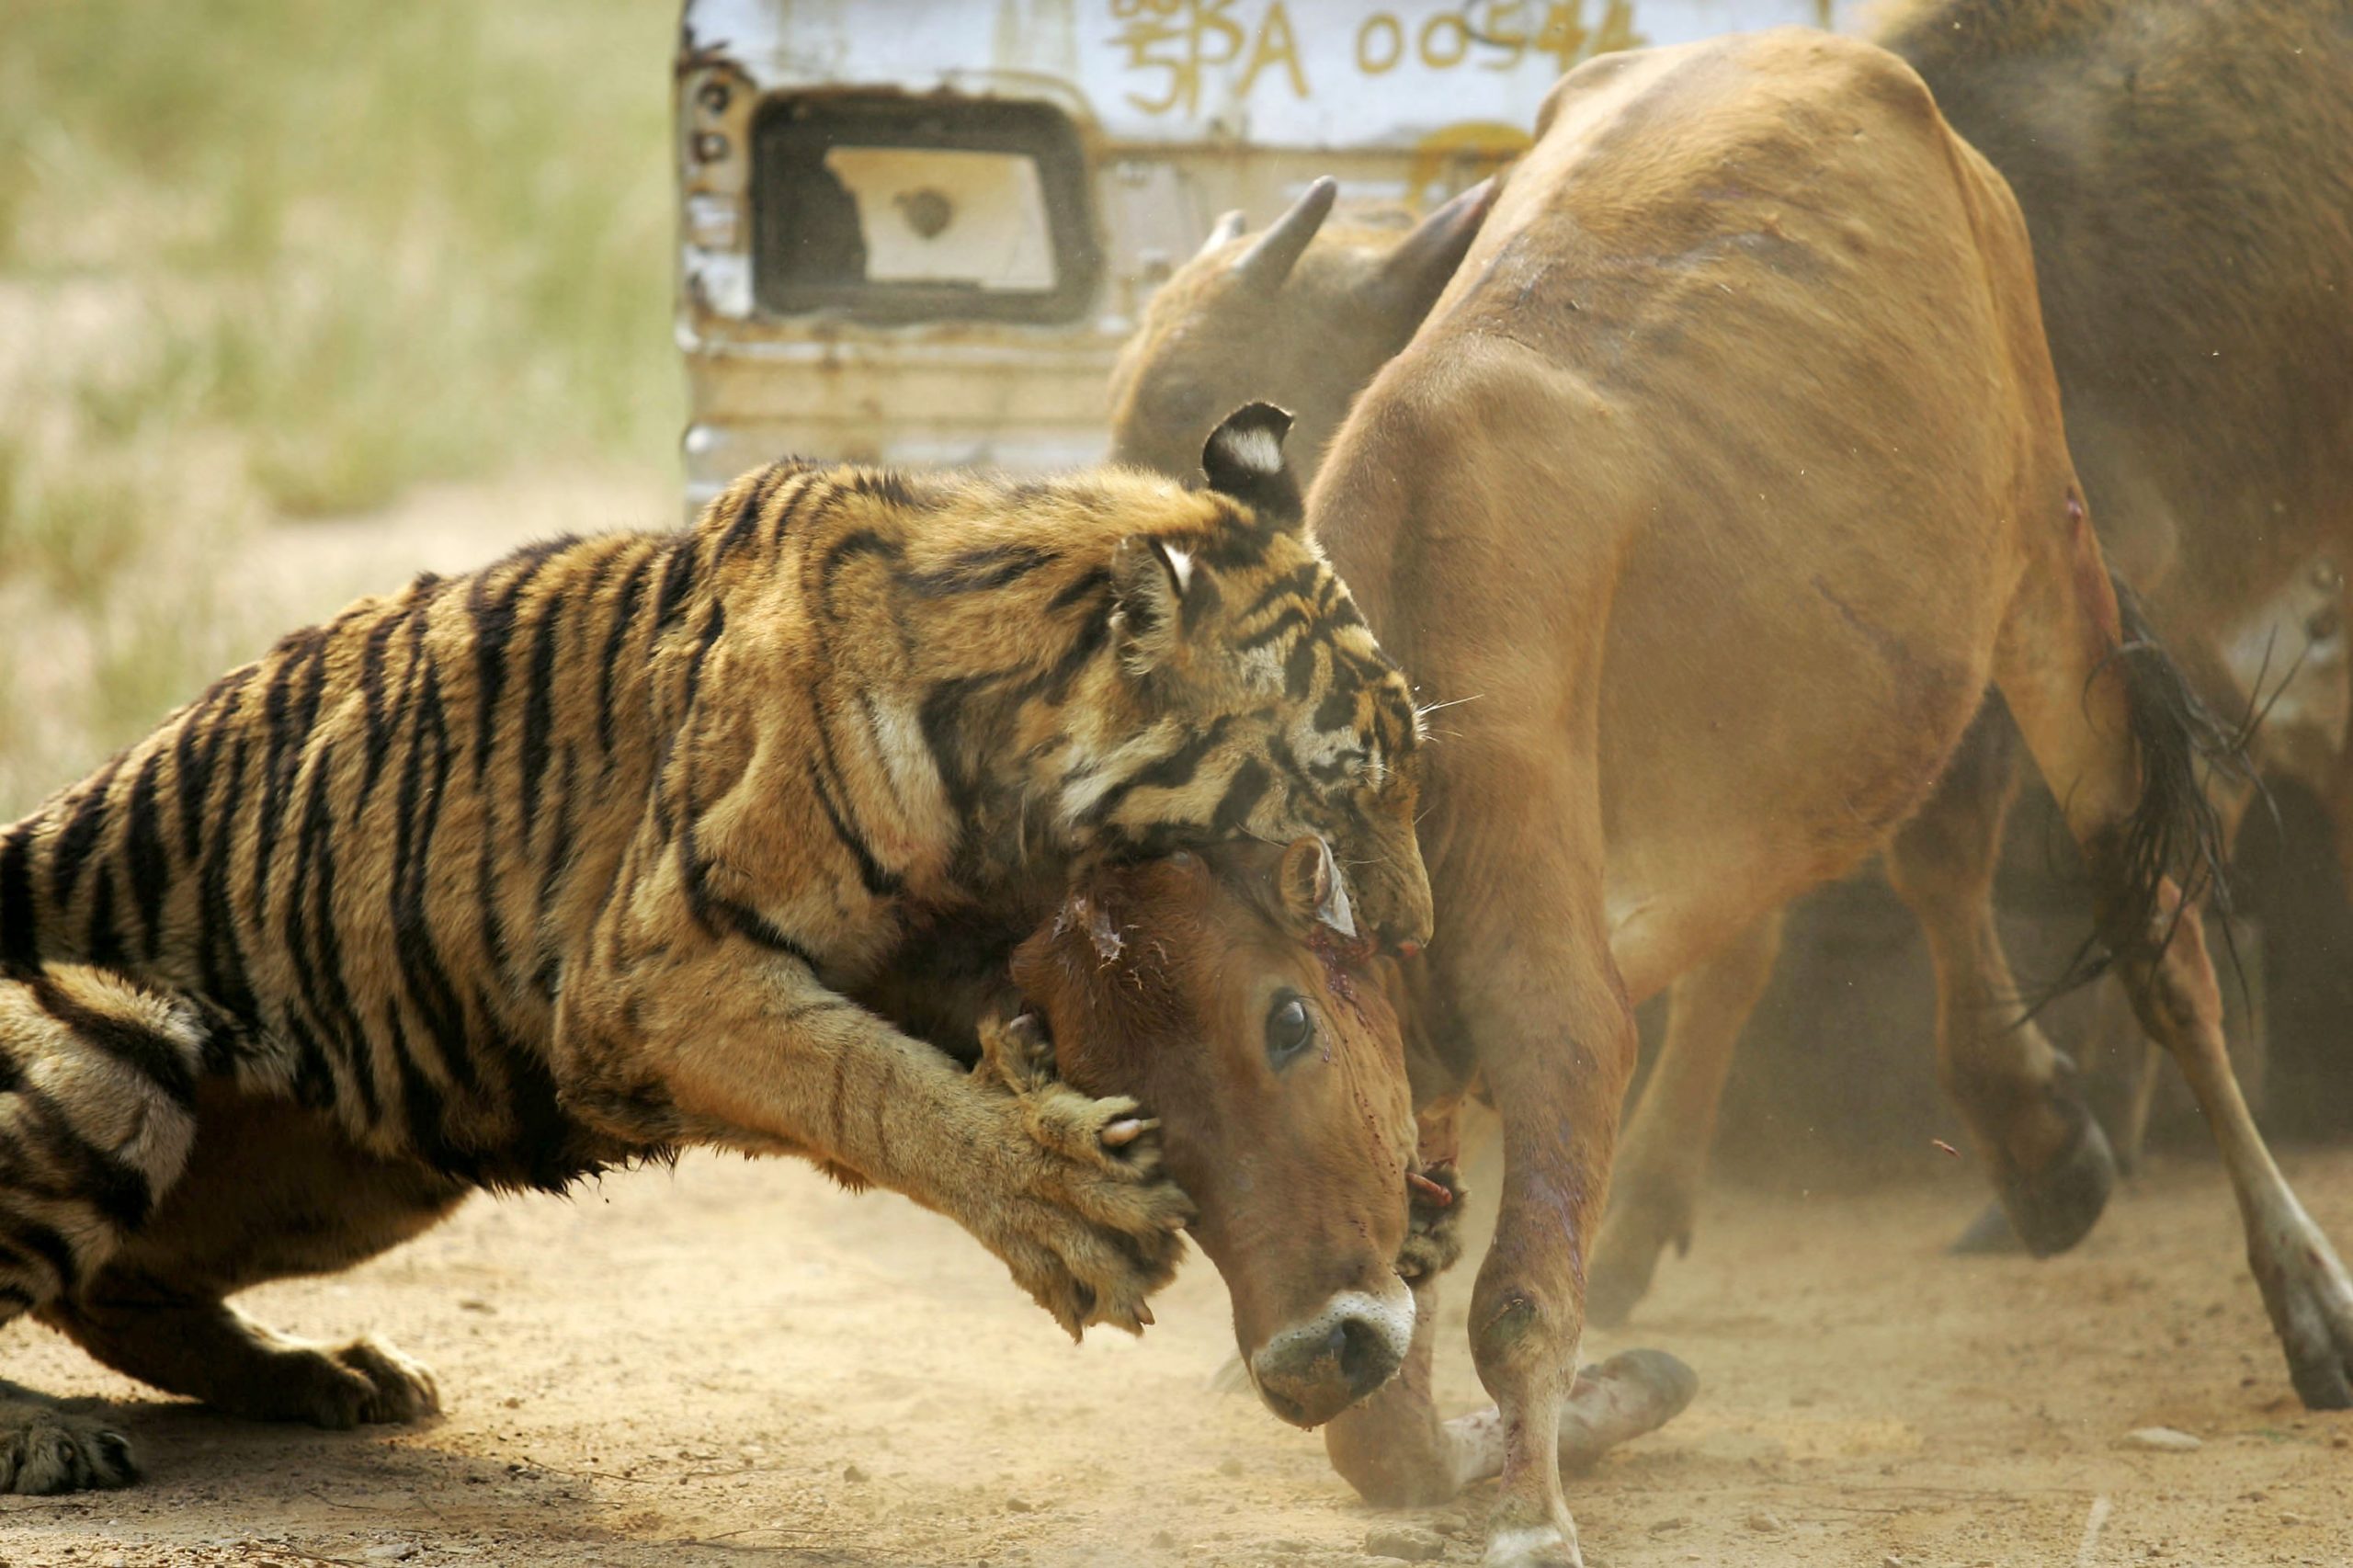 A tiger attacks a cow at the Wuhan Forest Safari Park on August 23, 2006 in Wuhan of Hubei Province, China. (Photo by China Photos/Getty Images)